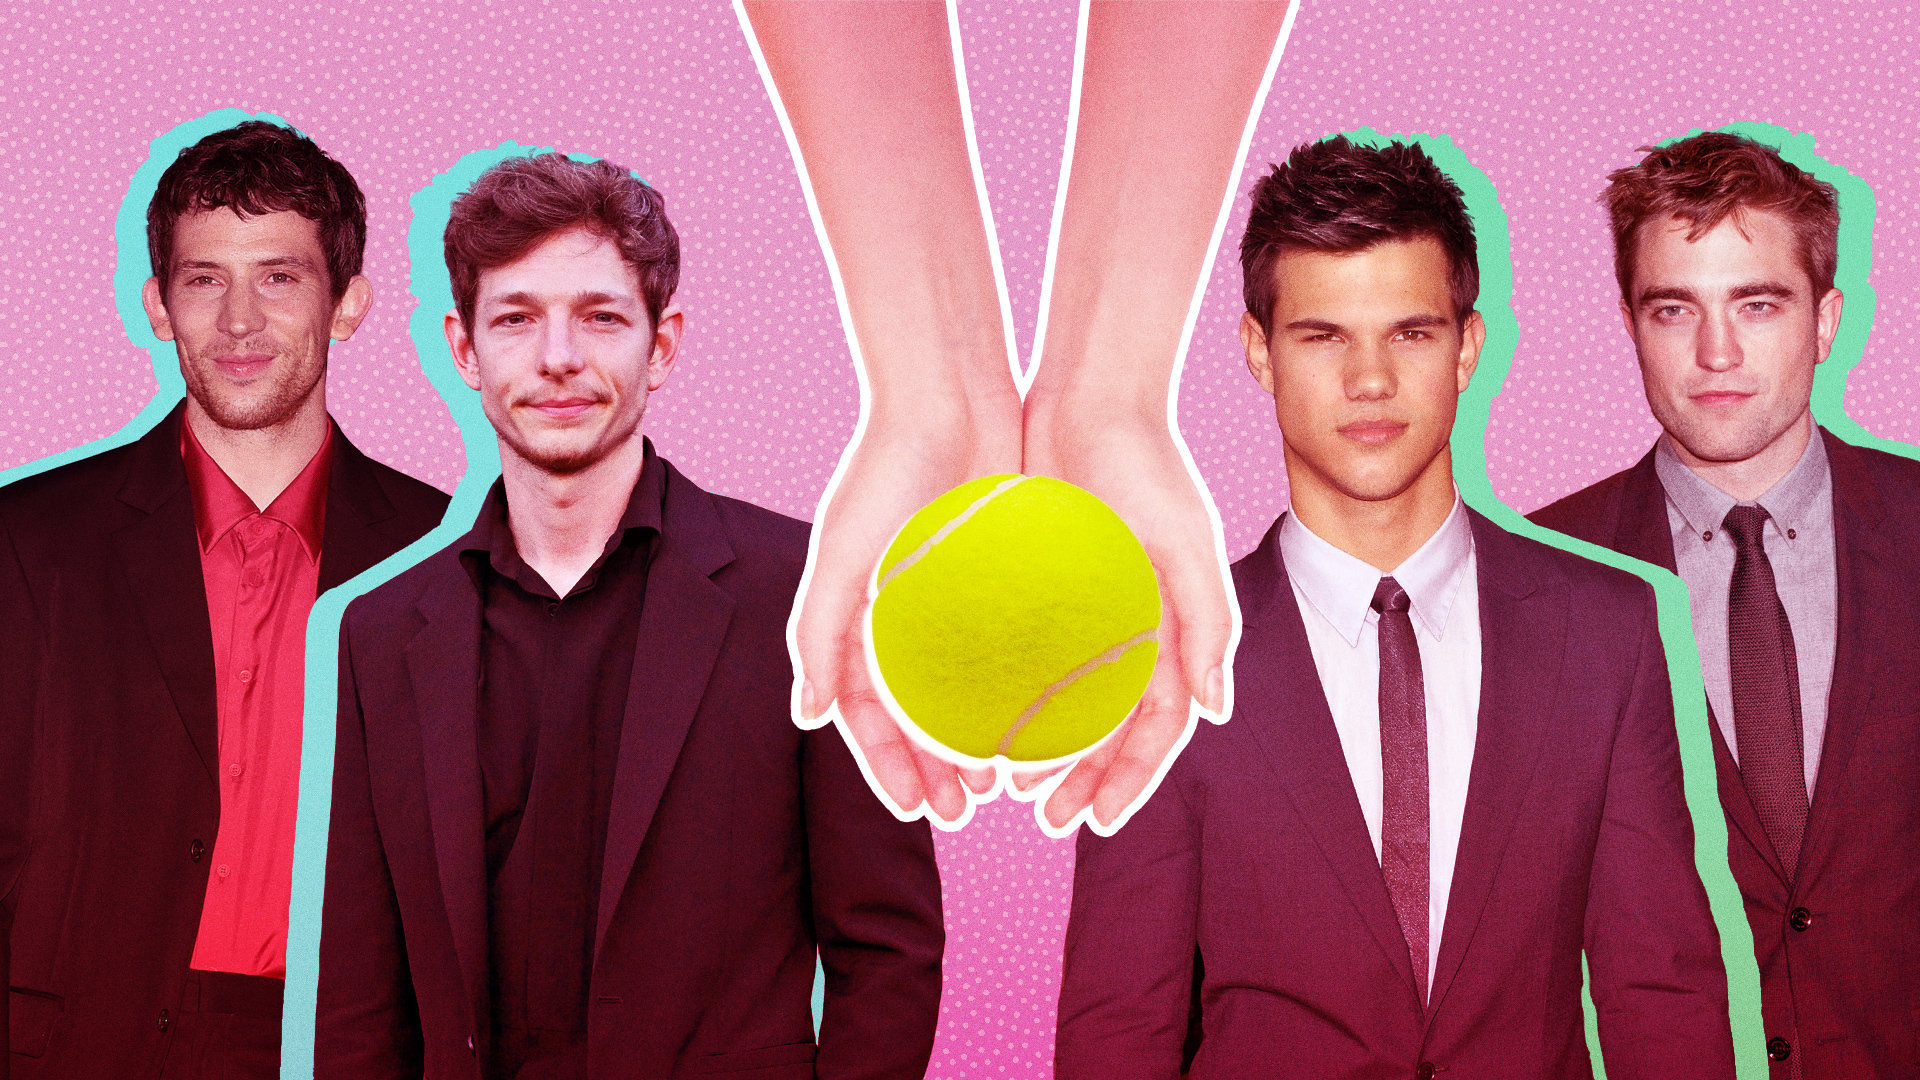 A collage of Josh O'Connor, Mike Faist, Taylor Lautner, and Robert Pattinson. A pair of hands grasp a tennis ball in the center of the image.